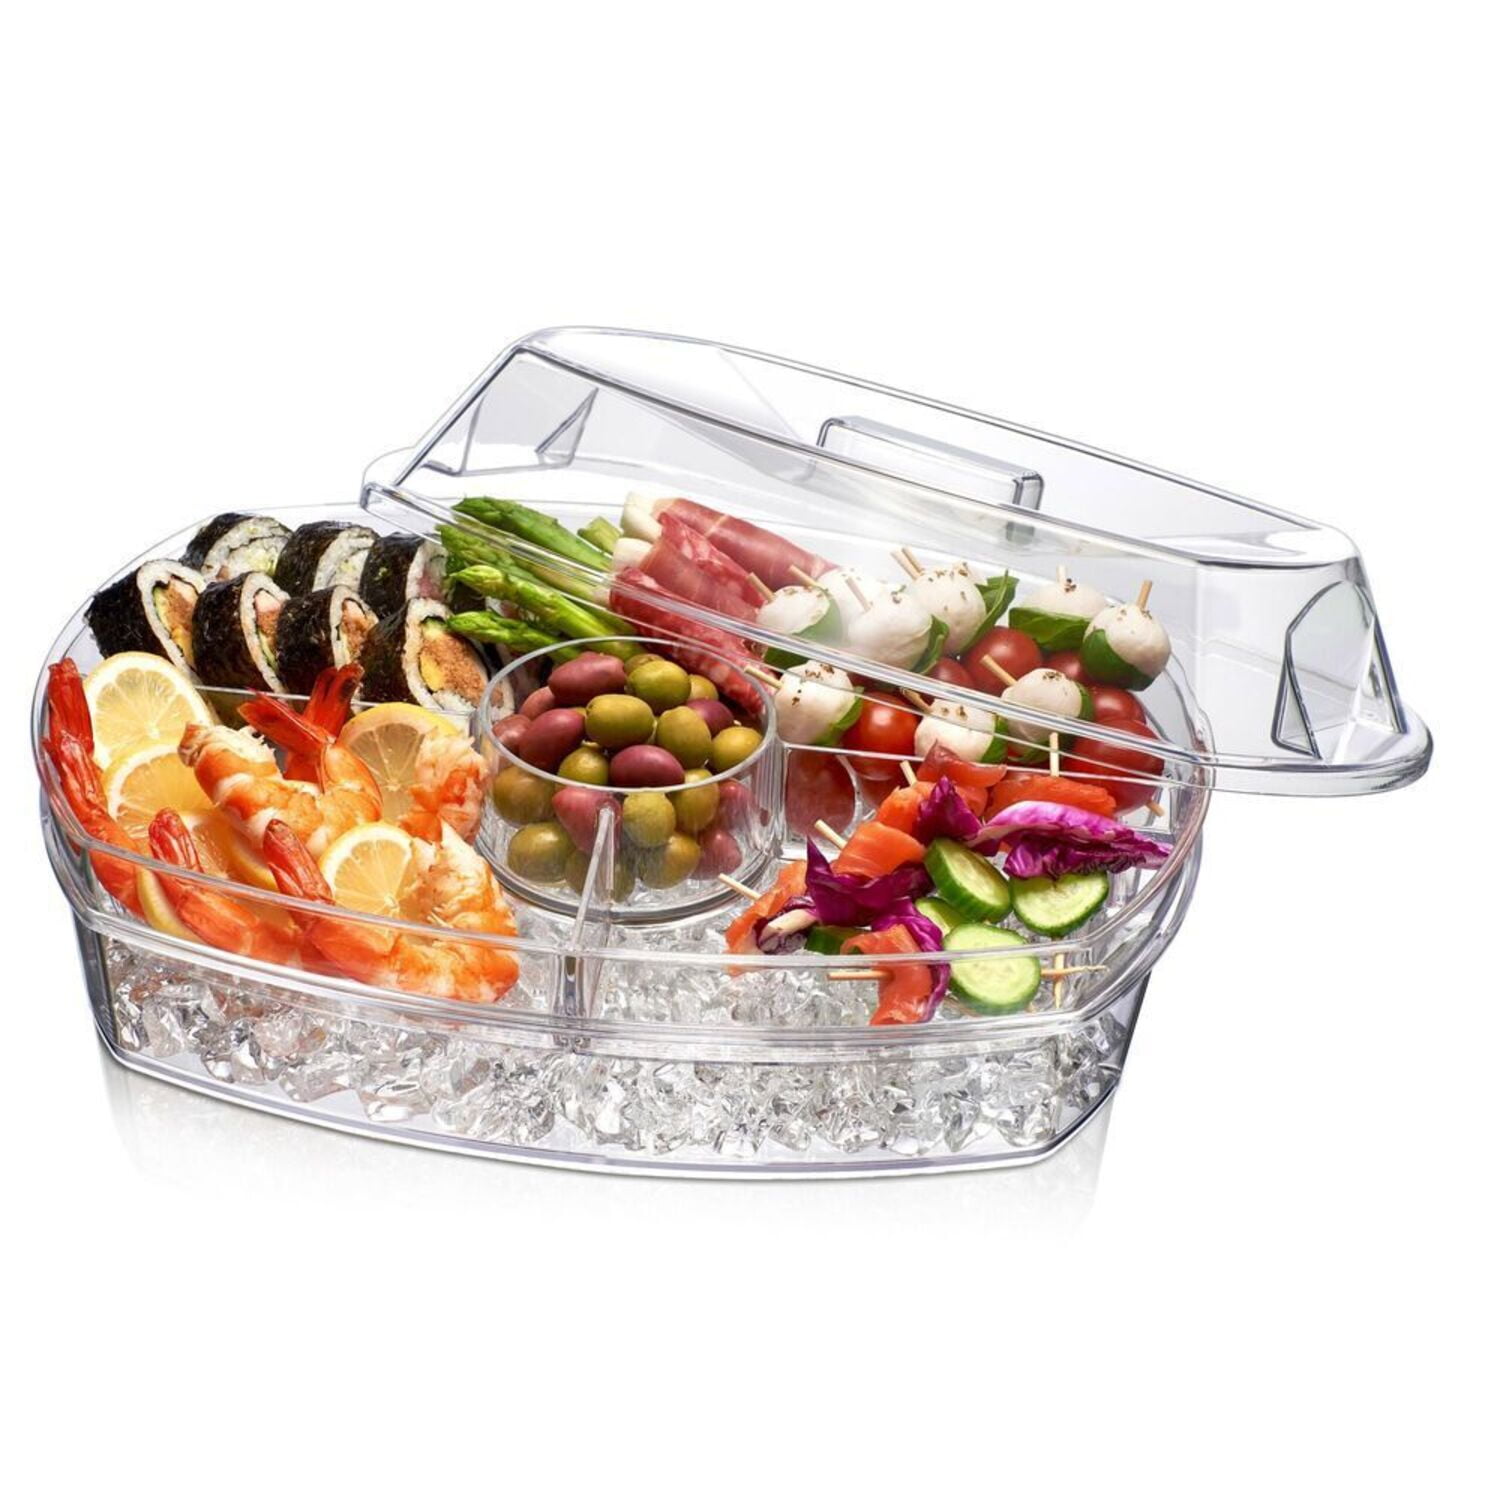 PRODYNE P-17 PARTY PLATTER ON ICE 3 PIECE SET (p17) - Picture 1 of 1